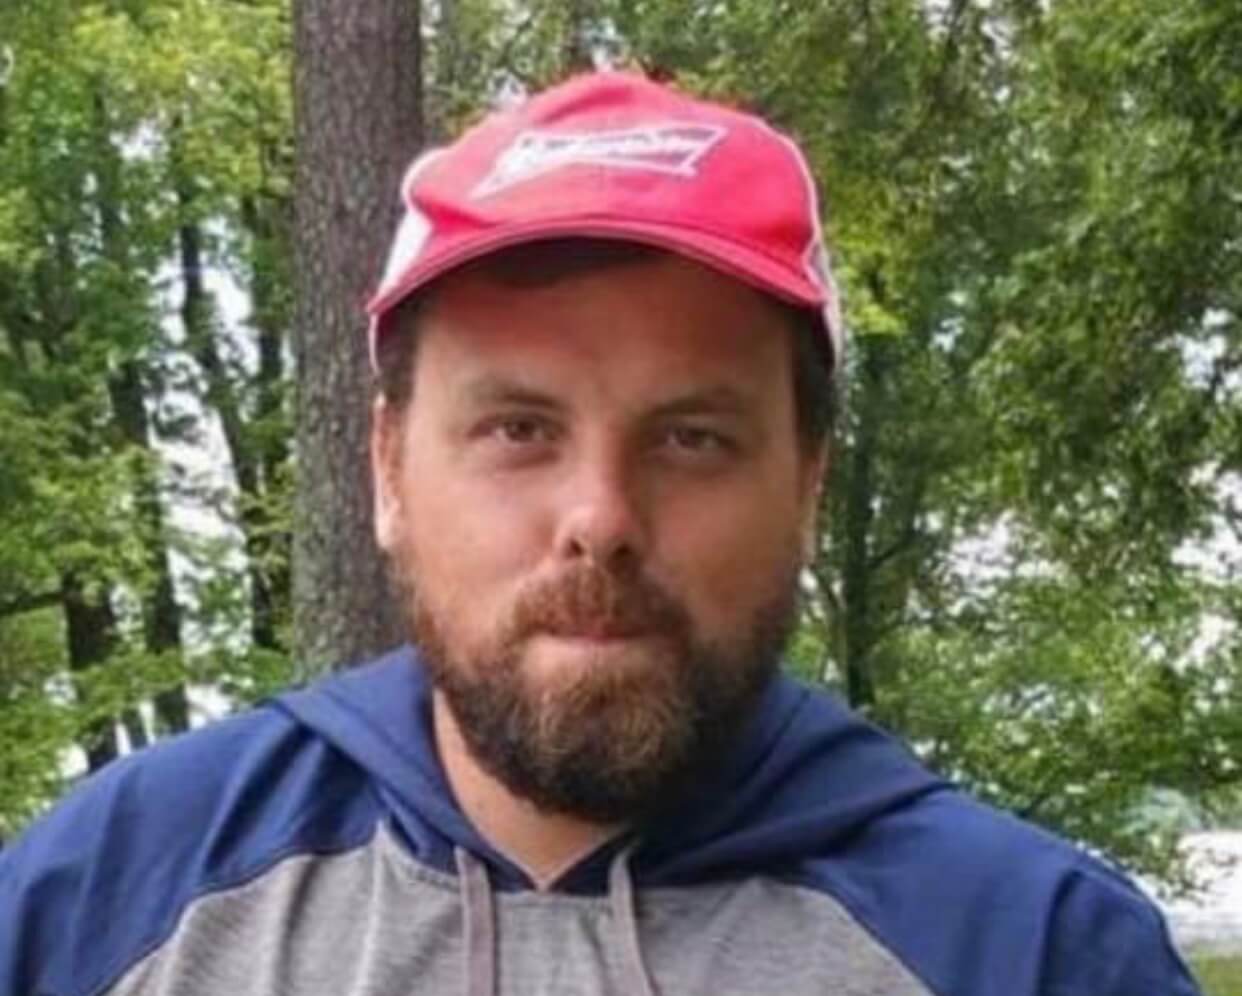 Police asking for help locating missing north Mississippi man